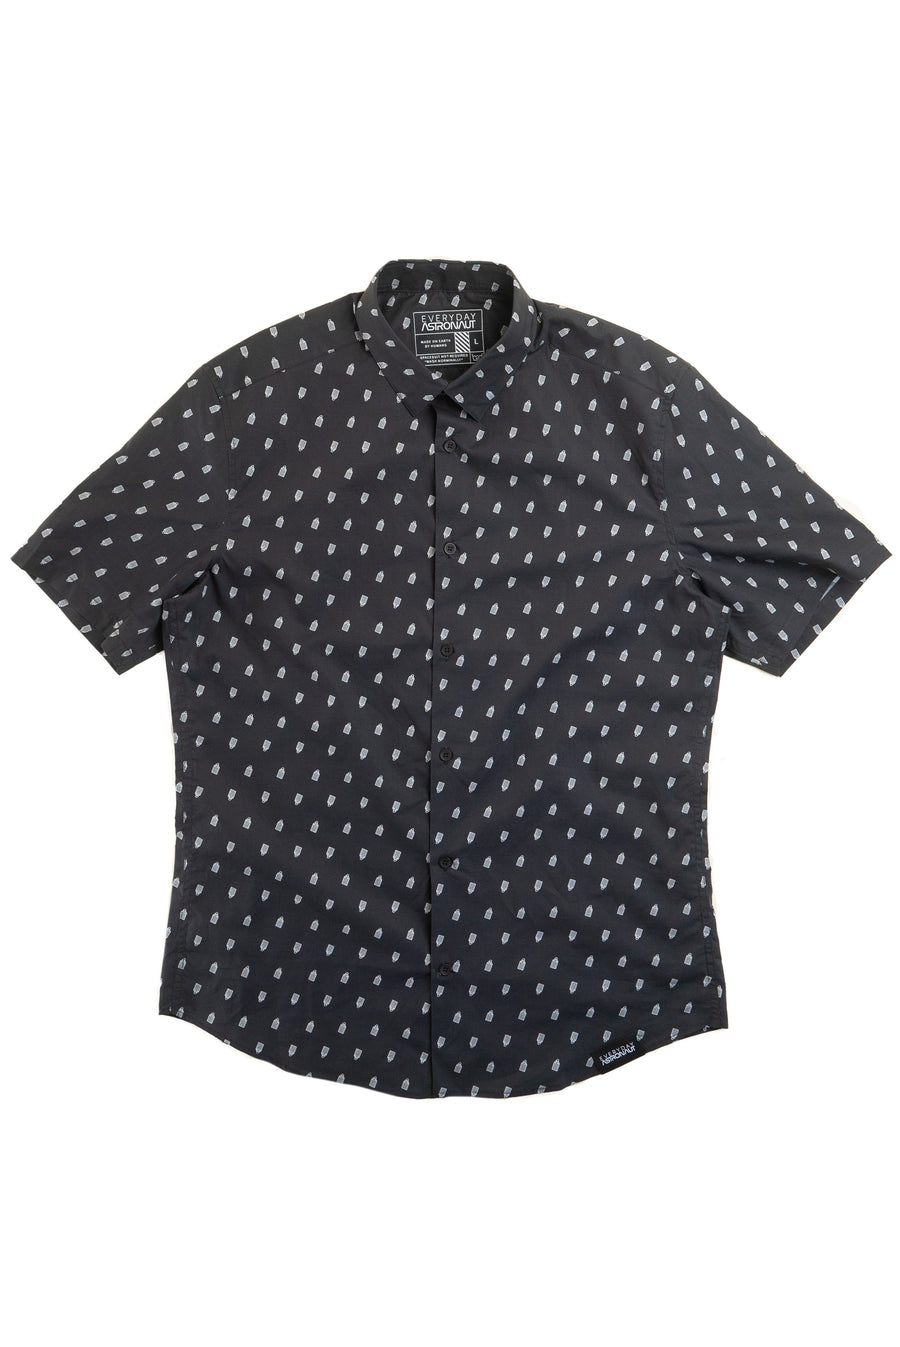 Grid Fin Button Up